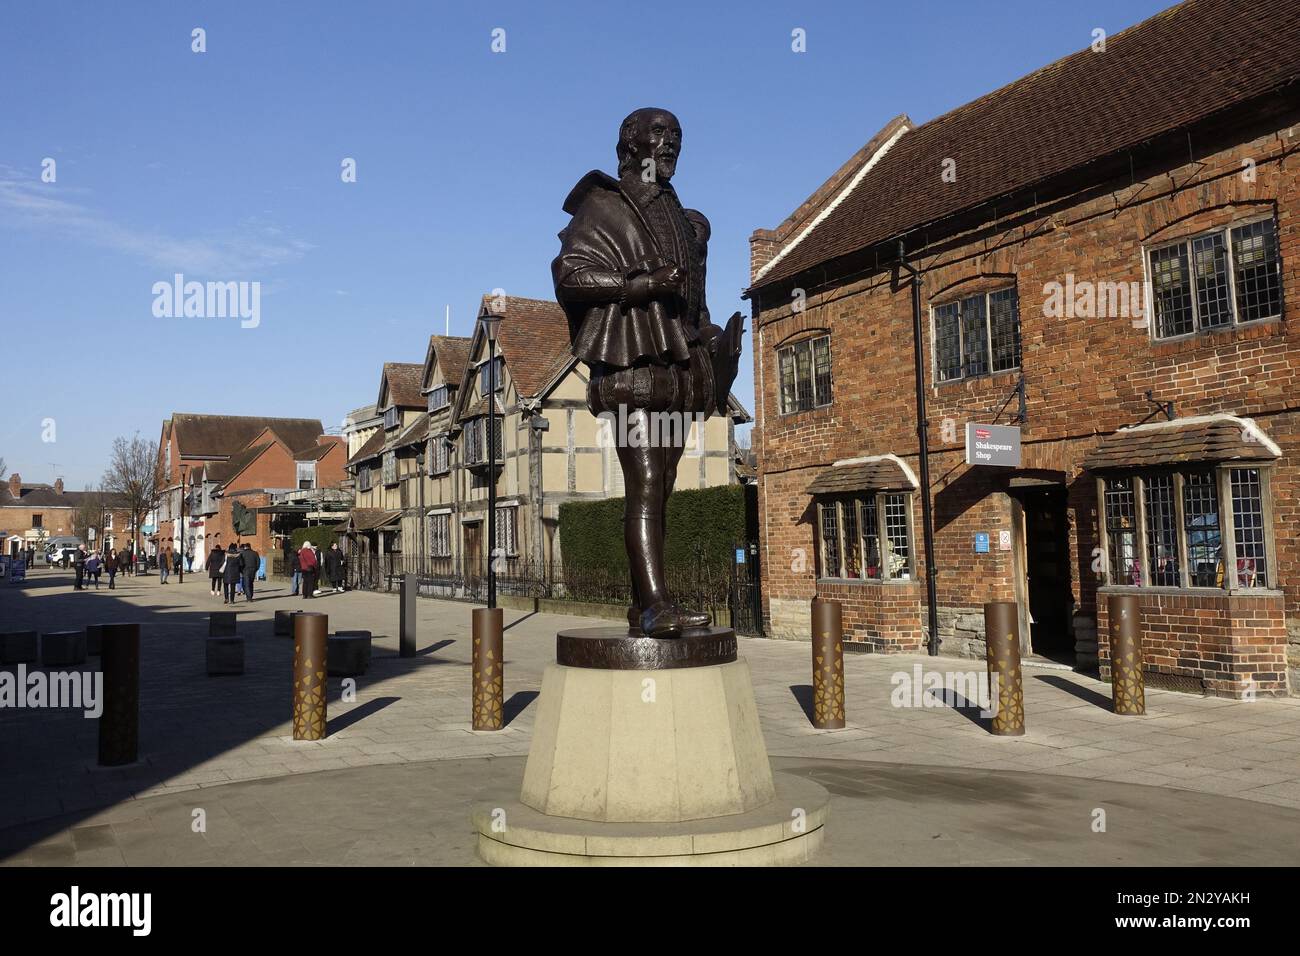 Created by sculptor James Butler, the new £100,000 bronze statue of the Bard William Shakespeare is located on Henley Street in Stratford-upon-Avon.. Stock Photo